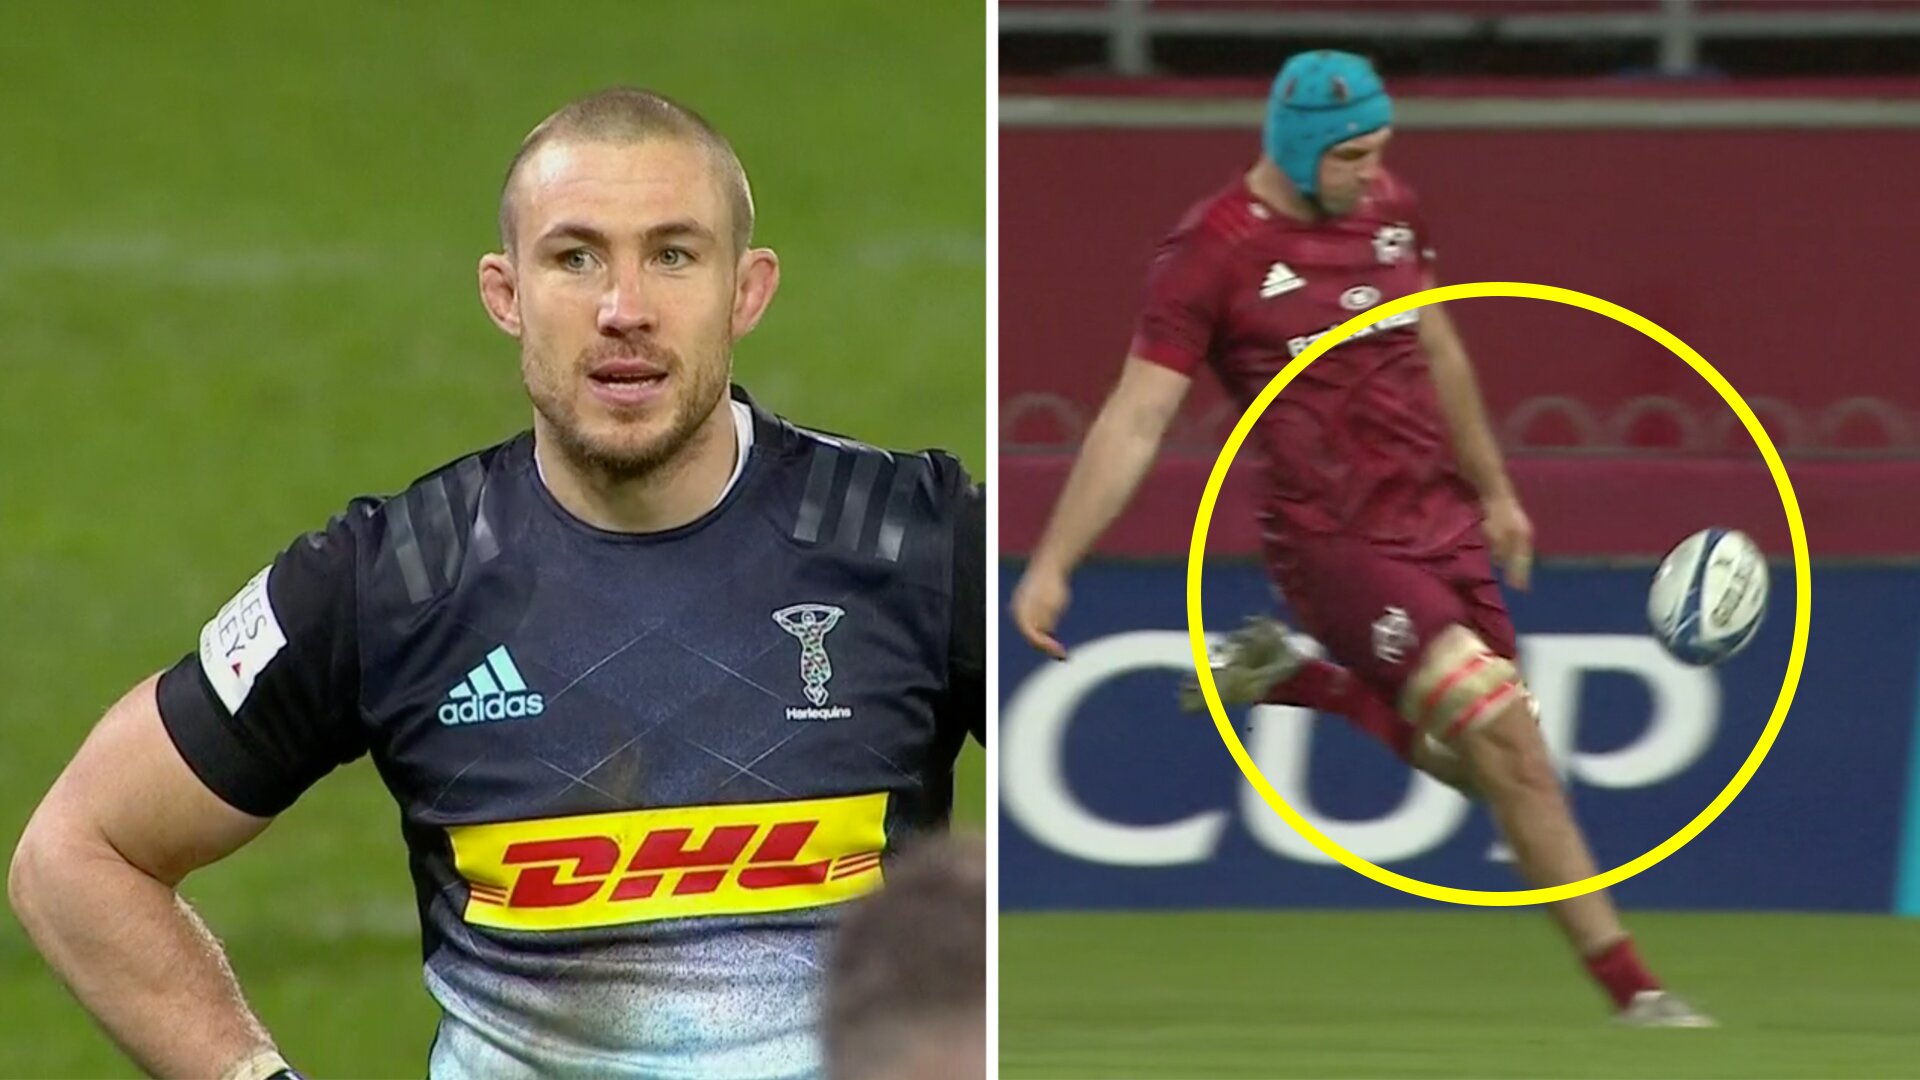 Tadhg Beirne has the internet in frenzy with 60 metre game-changing spiral kick